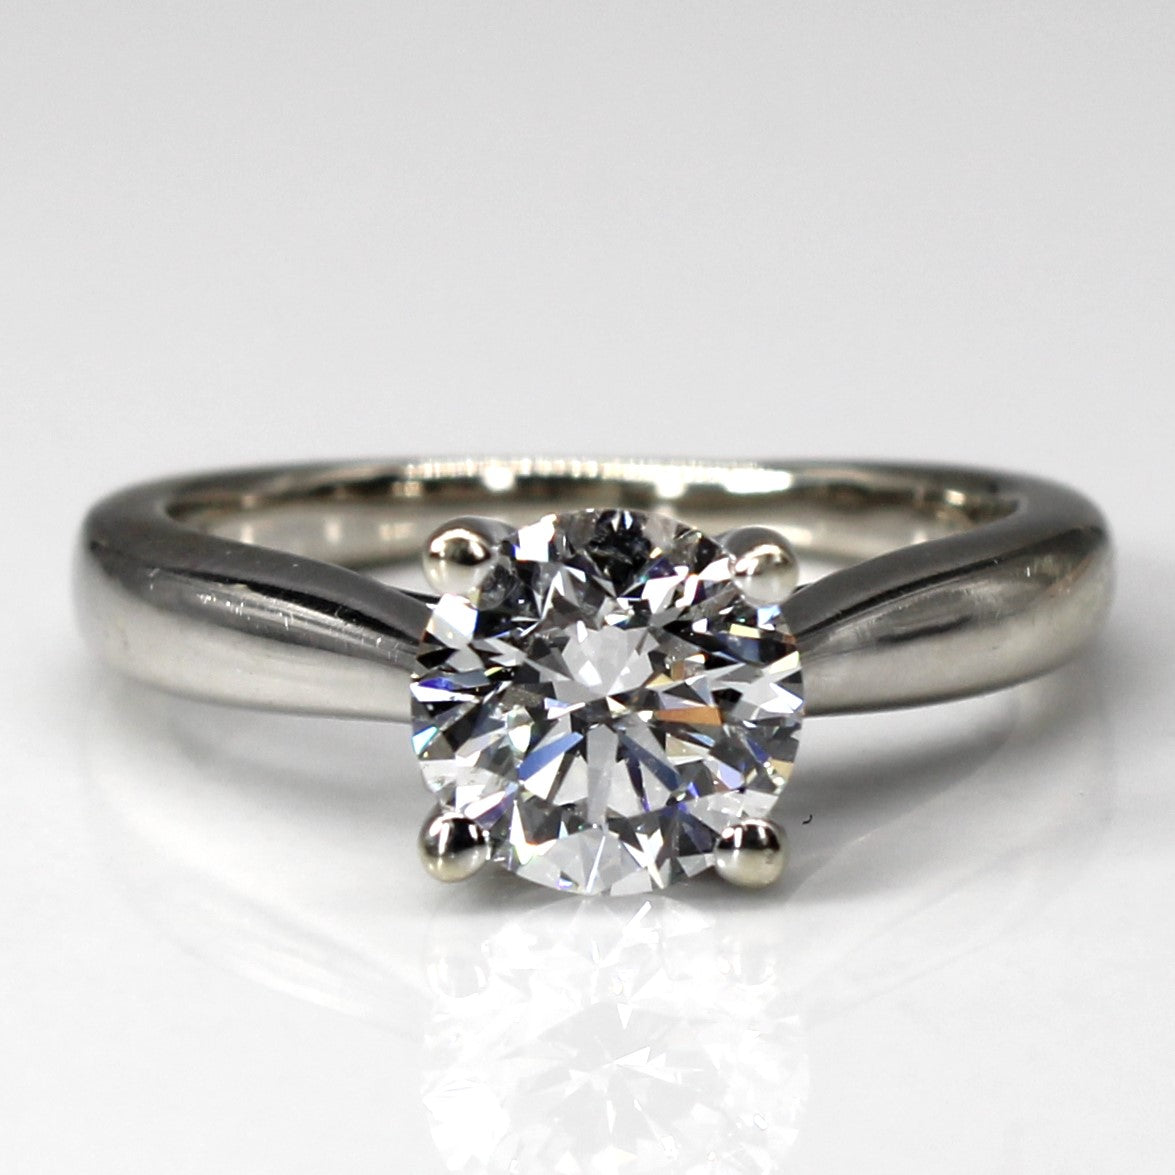 Solitaire Diamond Ring | 1.13ctw SI1/SI2 G | SZ 4.25 |